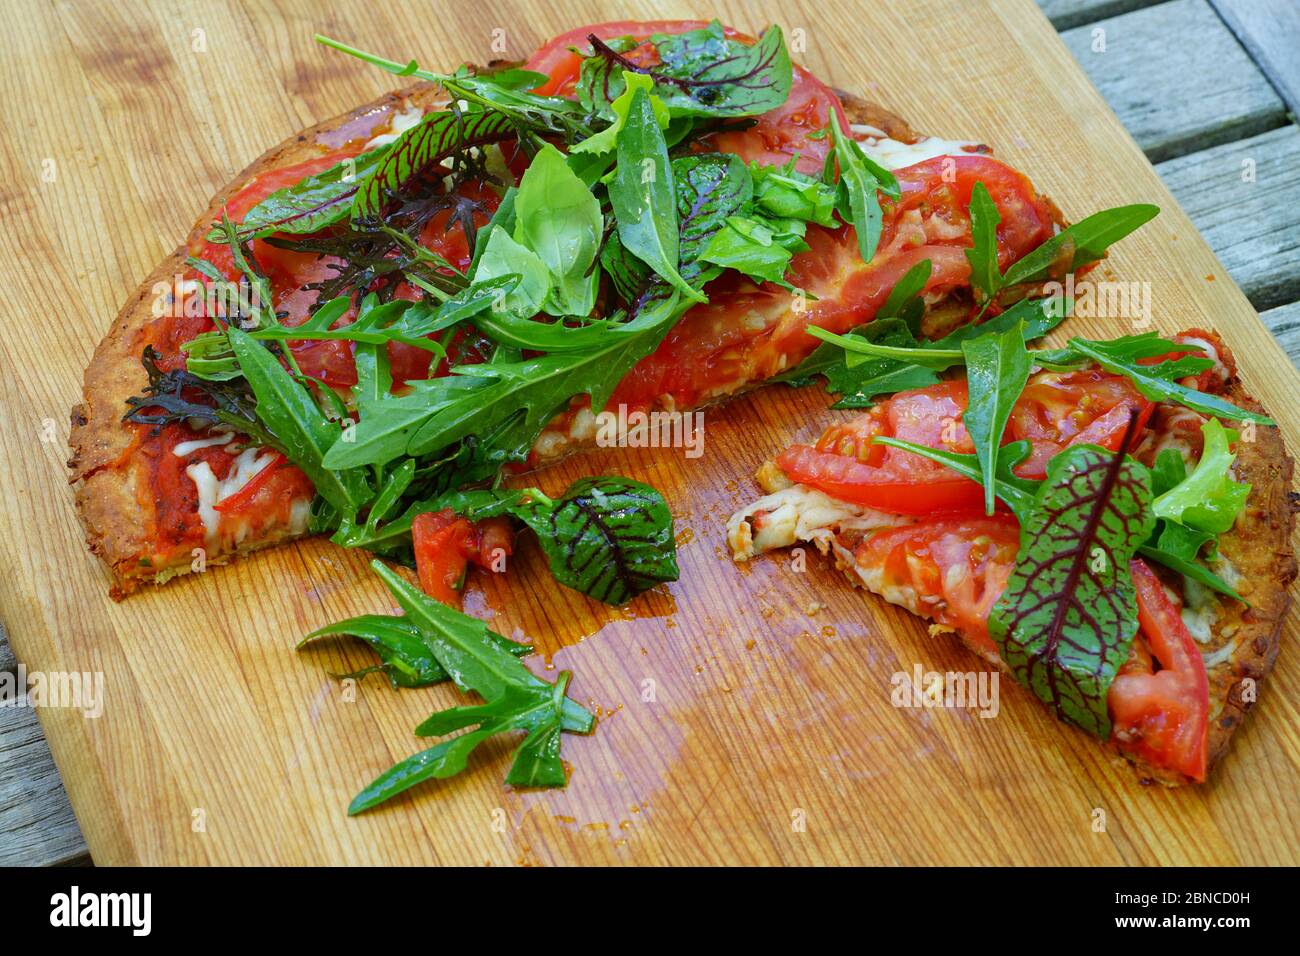 A pizza with red sauce and fresh salad on a gluten-free cauliflower crust Stock Photo